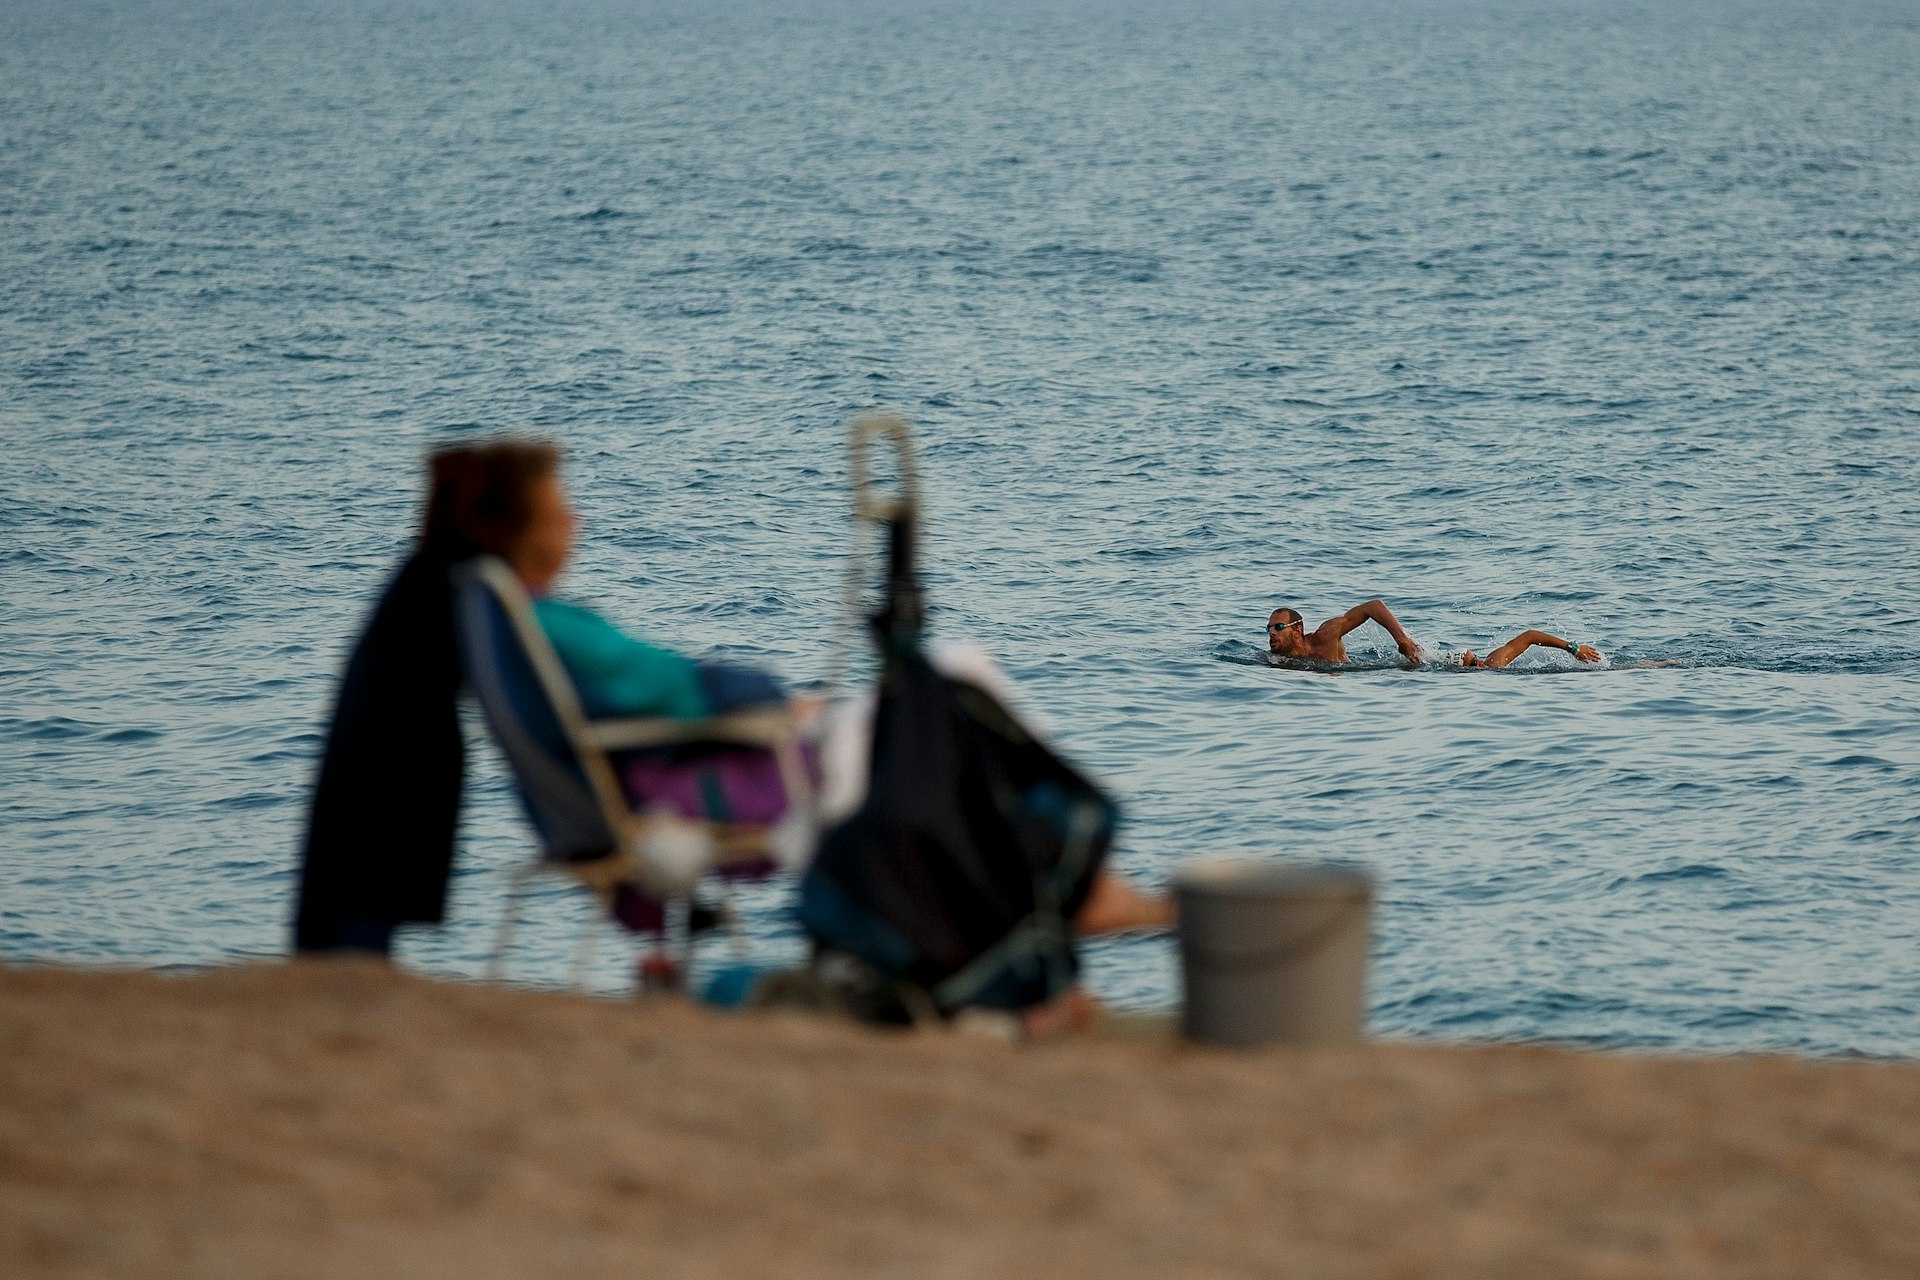 Two Ironman swimmers in the sea near Barcelona swim past the silhouette of an old woman on the beach